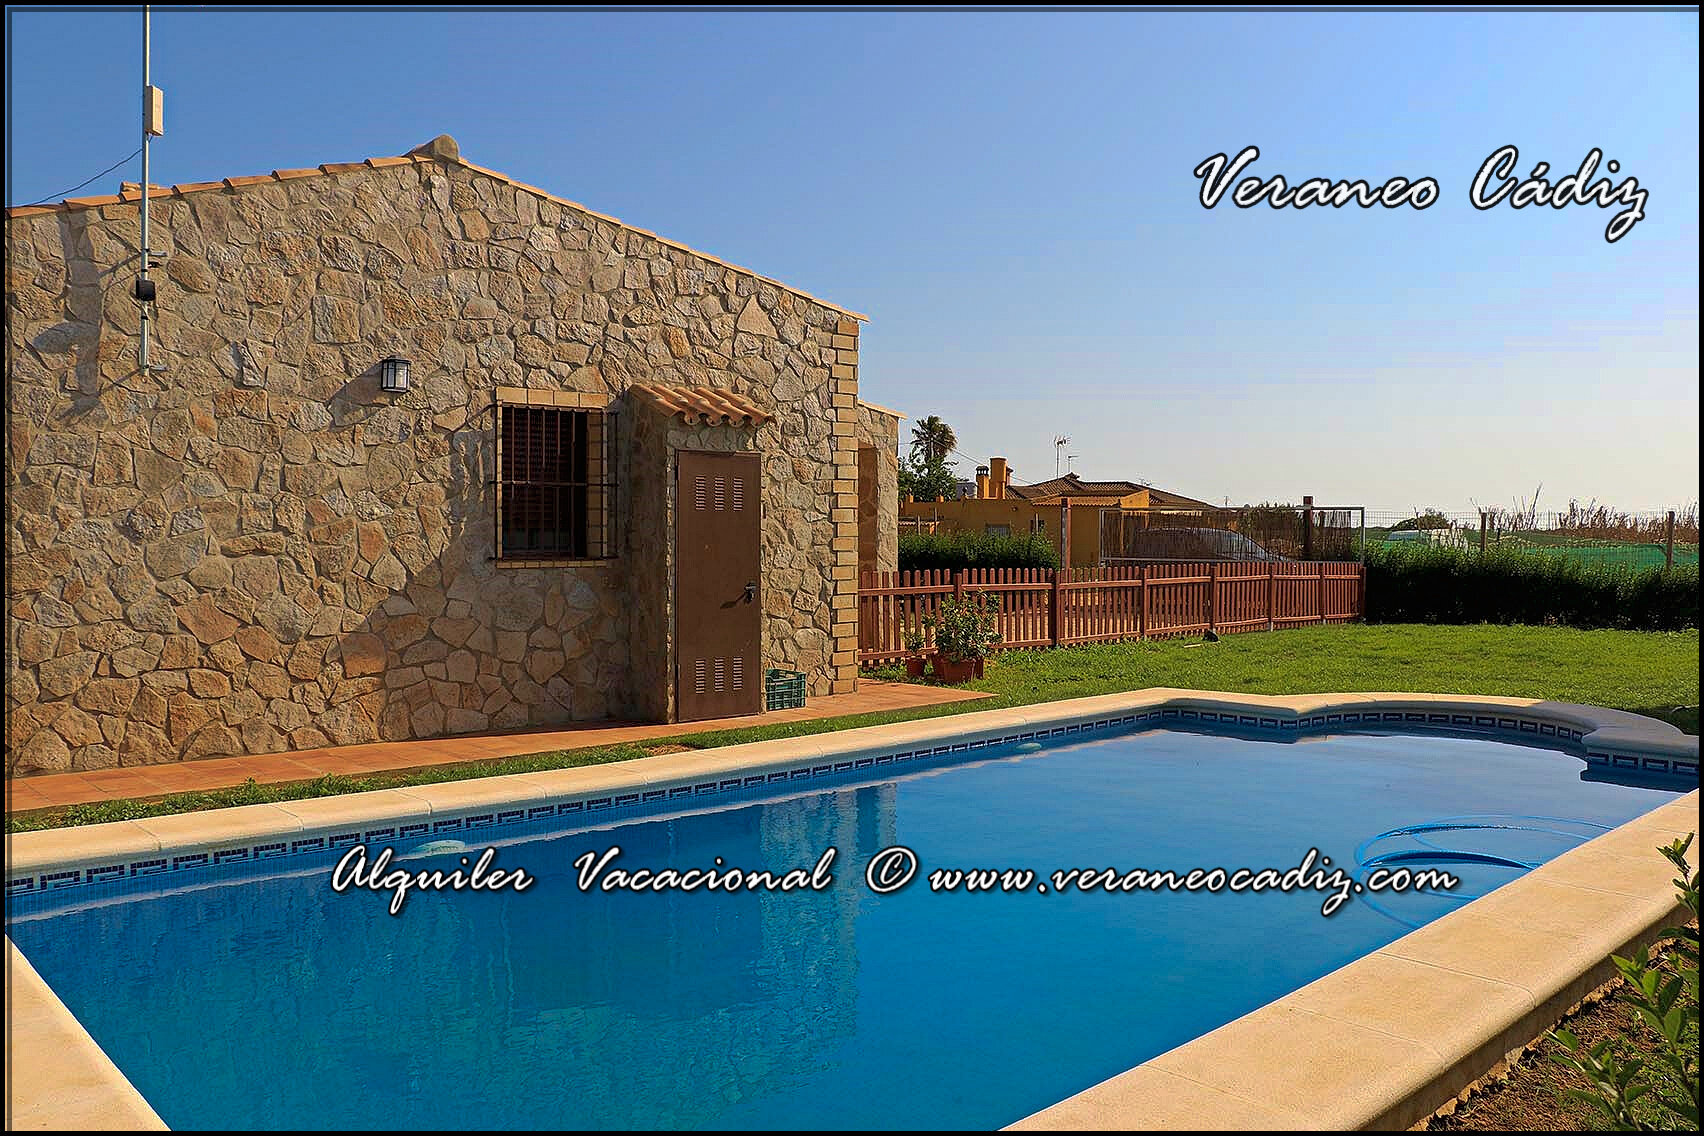 Alquiler vacacional Chalet | Conil 221